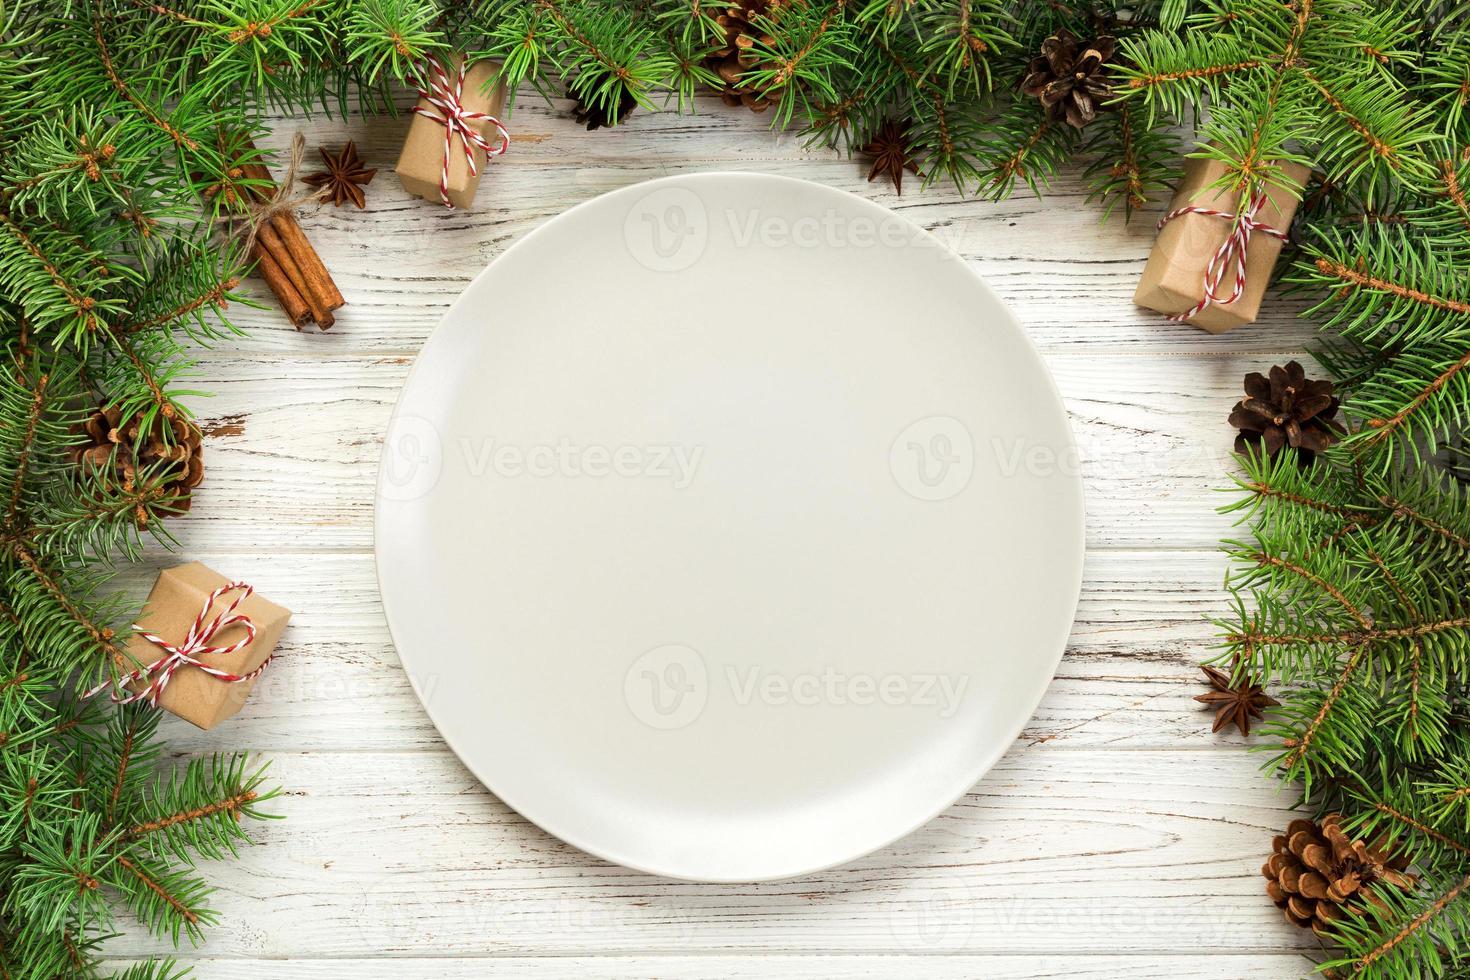 top view. Empty plate round ceramic on wooden christmas background. holiday dinner dish concept with new year decor photo